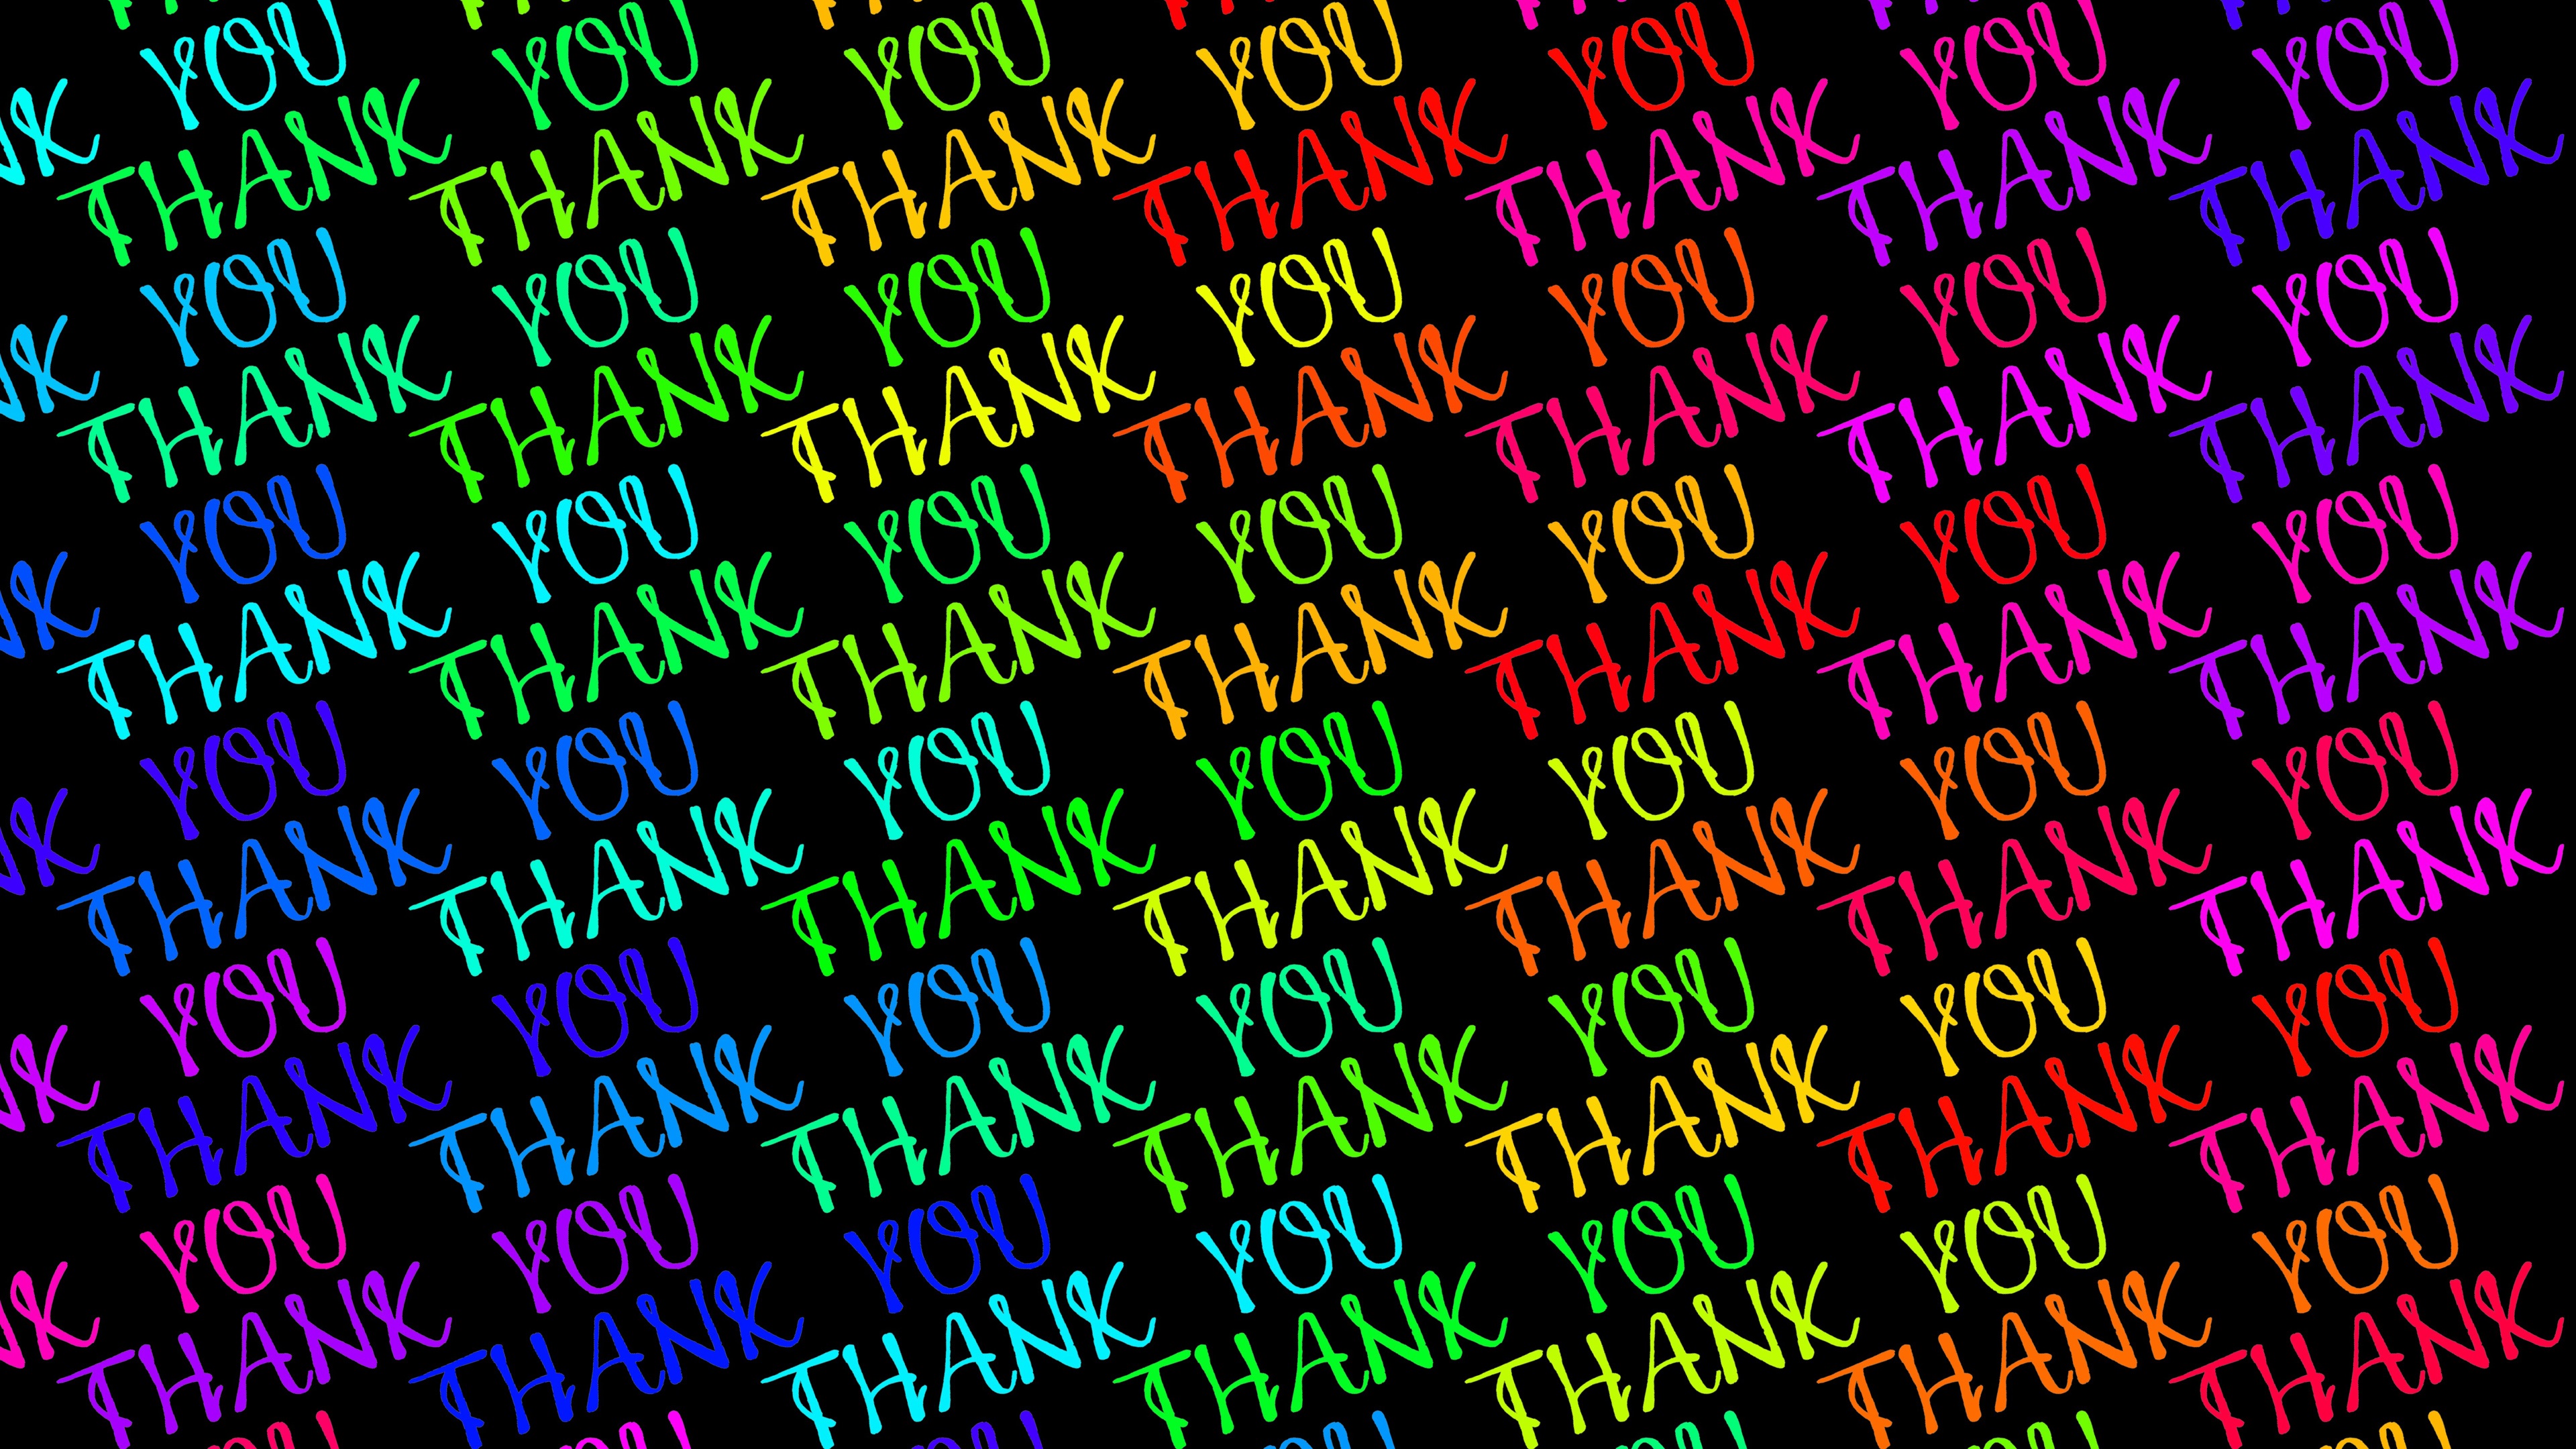 Wallpaper Colorful Thank You Text - Thanks Images Hd Download - HD Wallpaper 